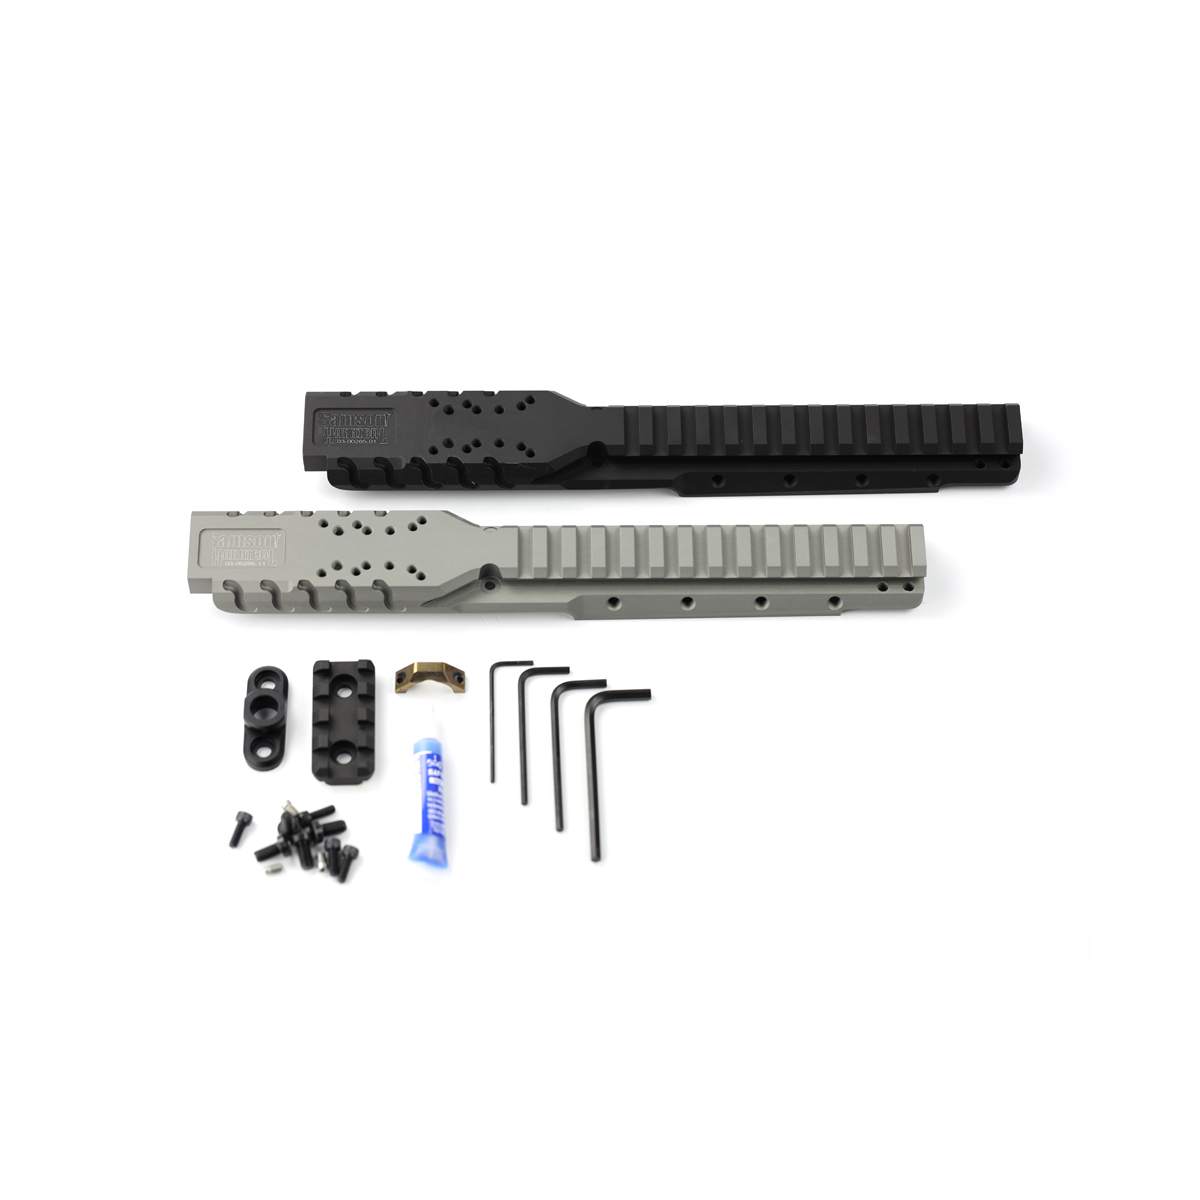 Samson Manufacturing: Hannibal™ Rail for the Ruger® Mini-14® or